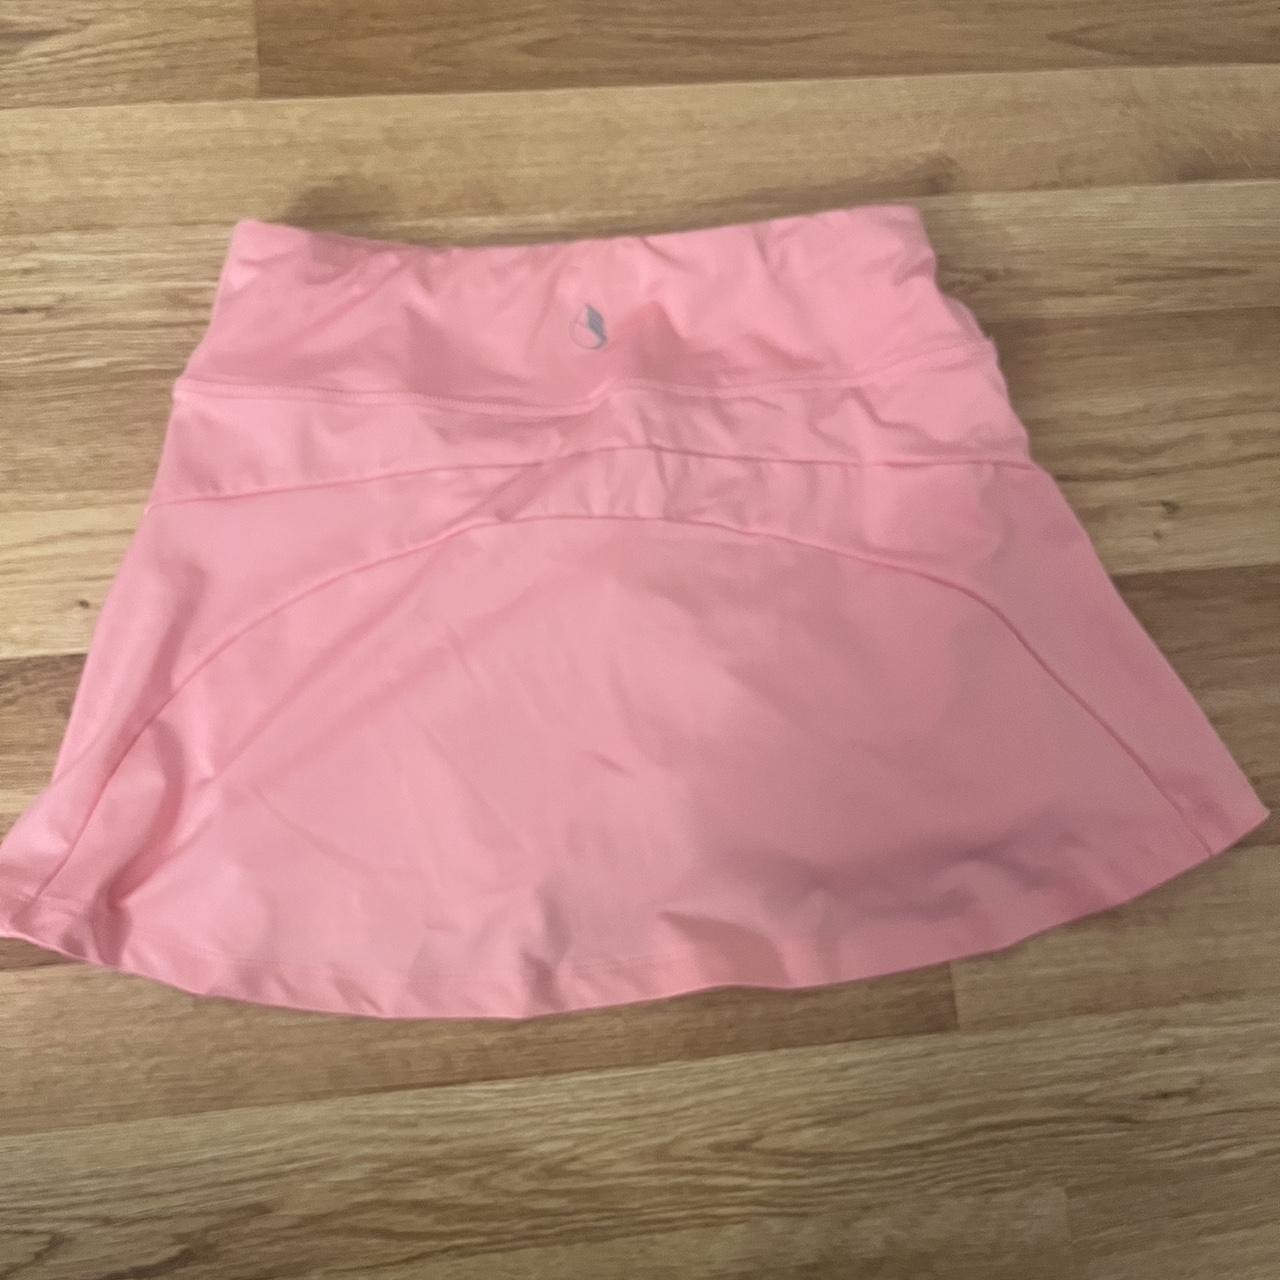 pink tennis skirt with built in shorts size s barely... - Depop